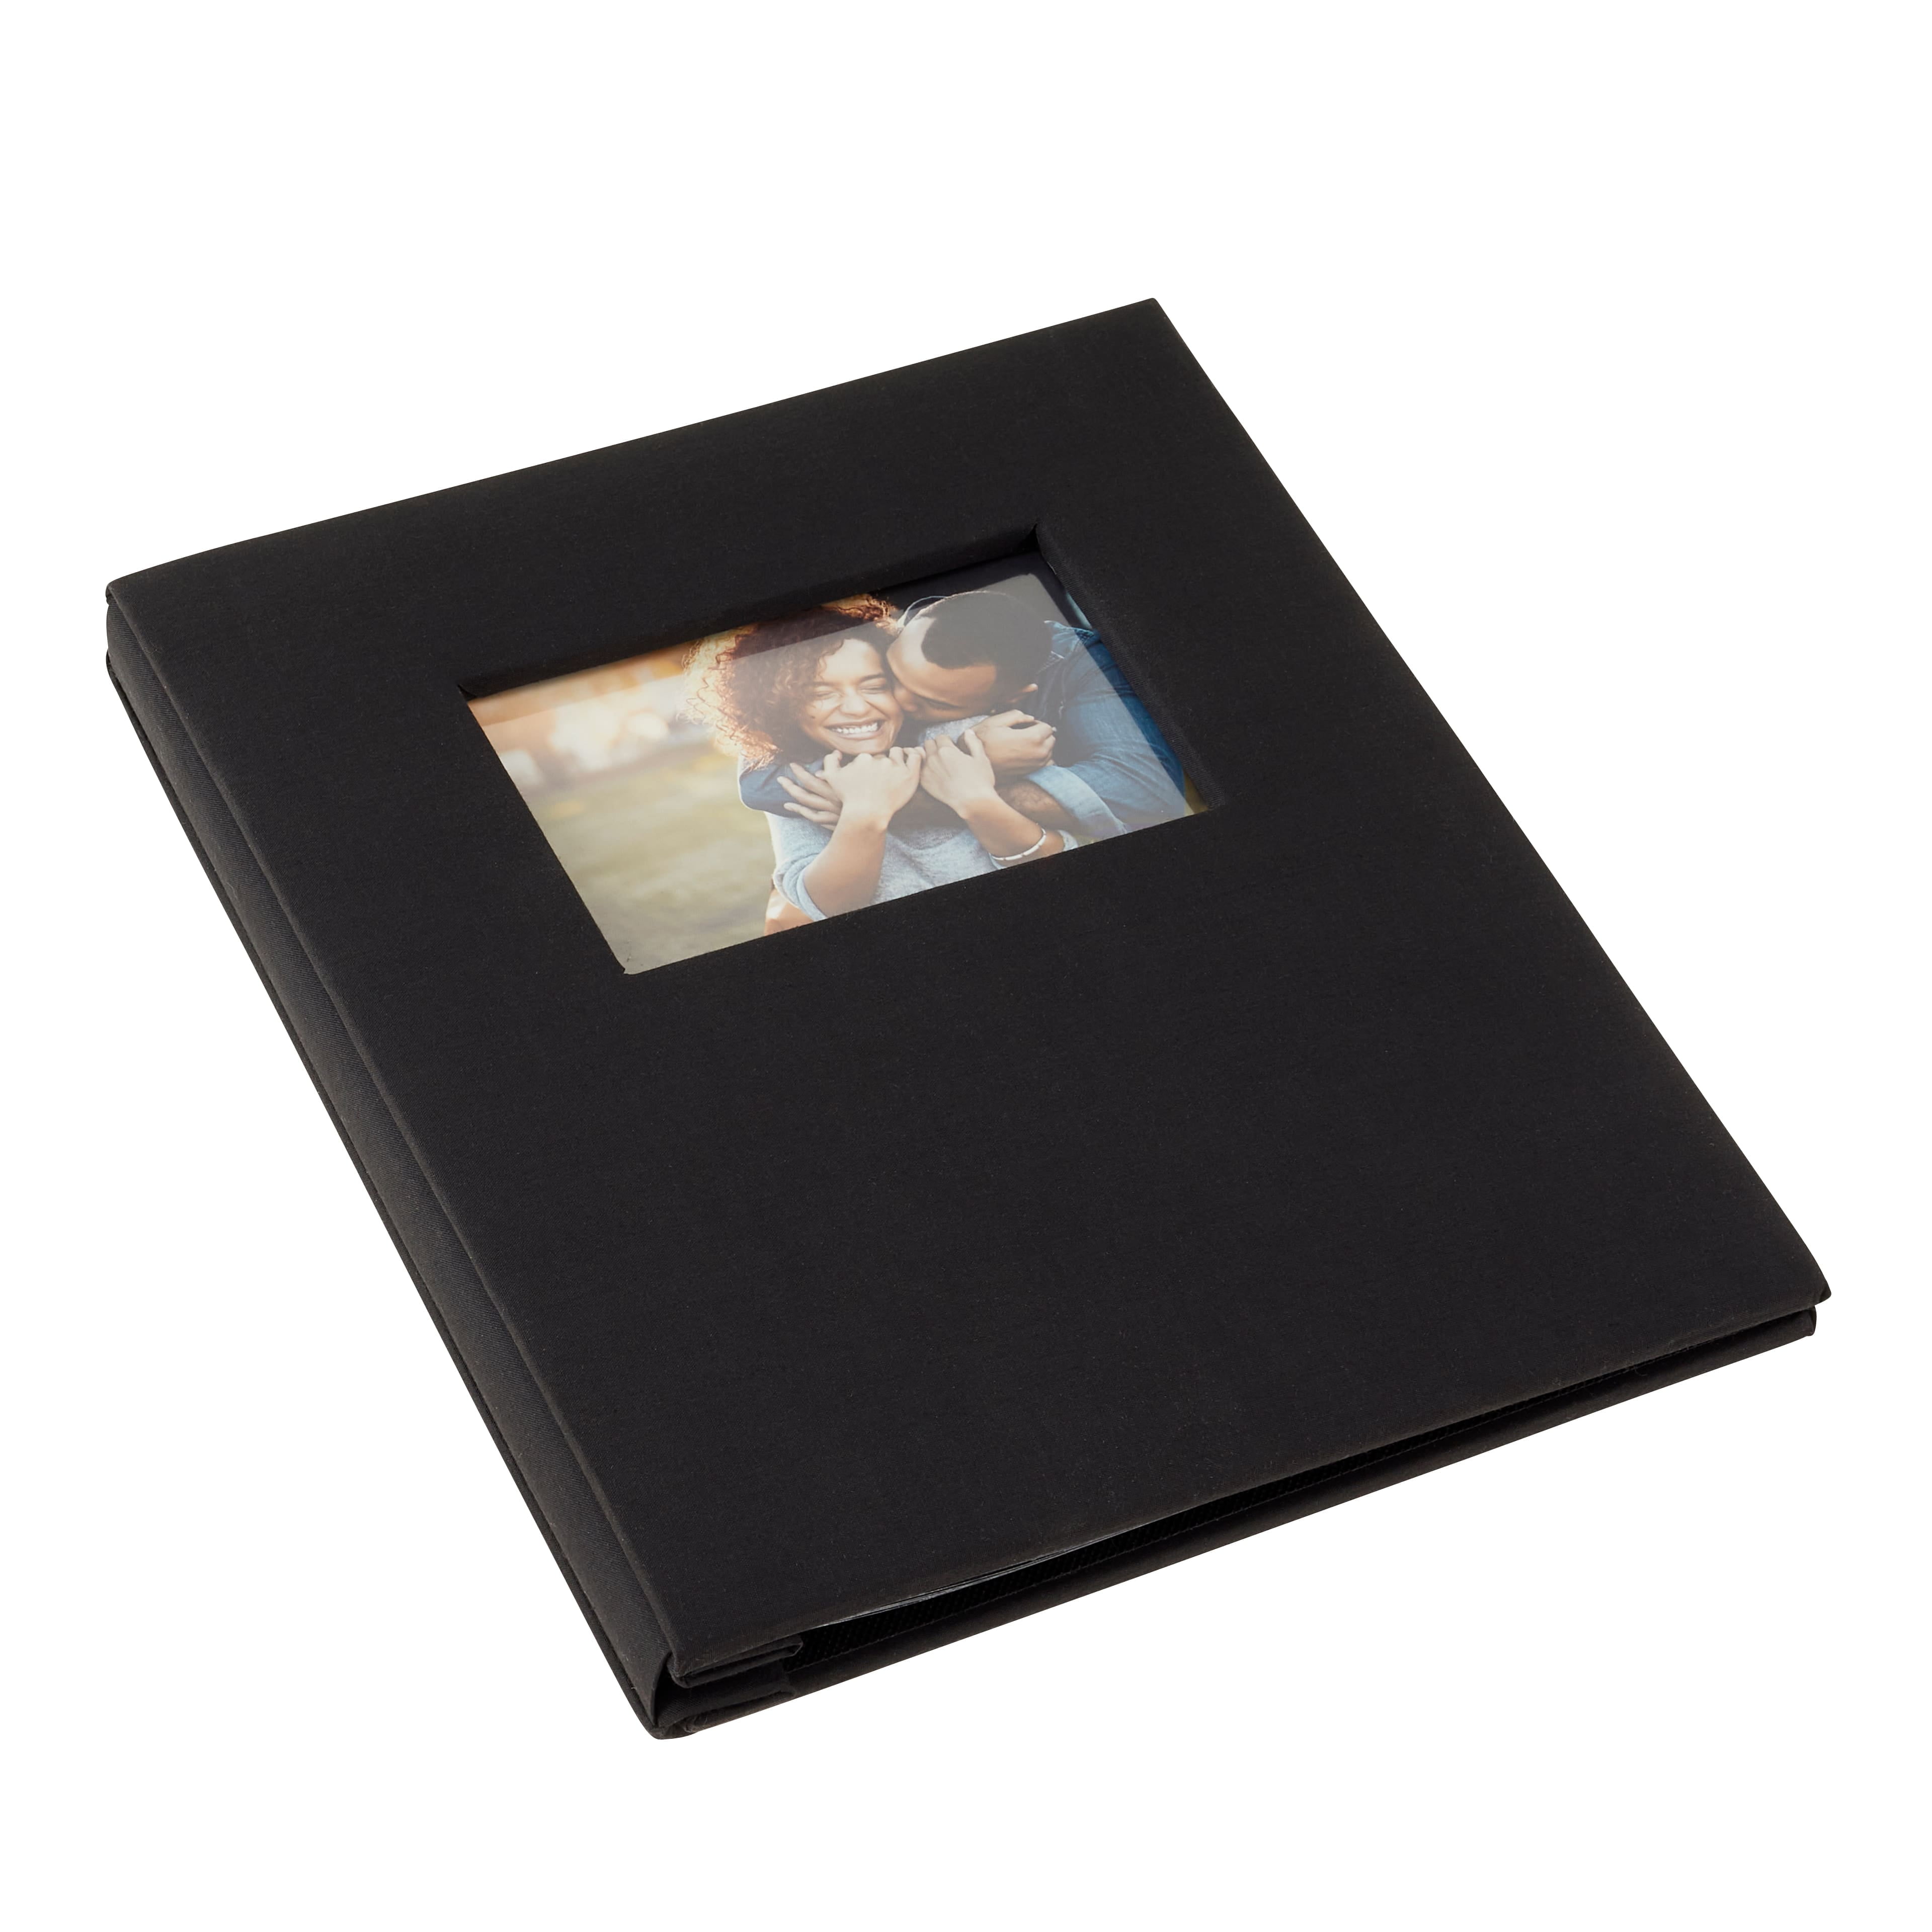 6 Pack: Black Scrapbook Album, 8.5 x 11 by Recollections® 